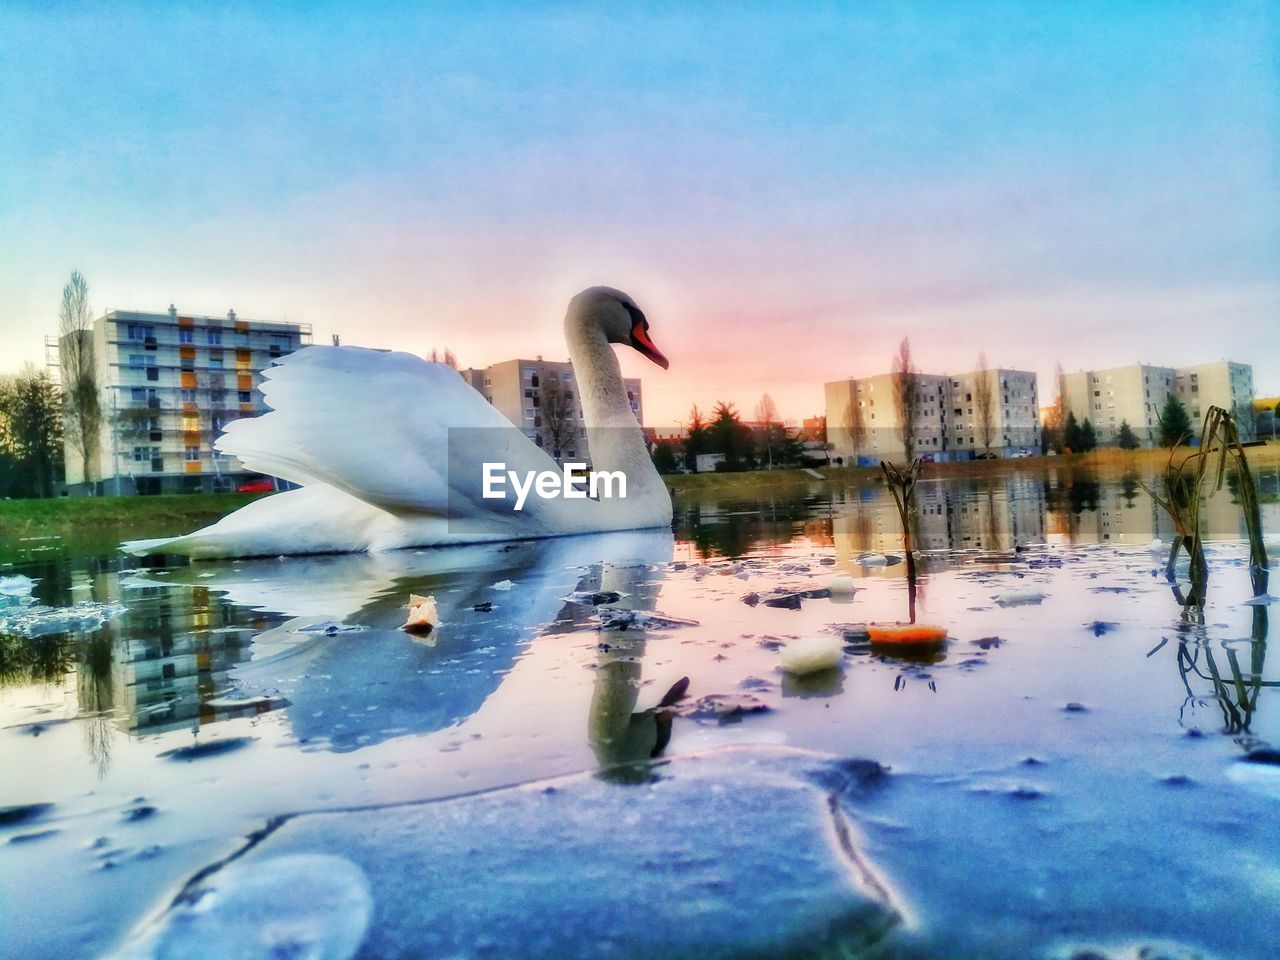 VIEW OF SWAN IN CITY